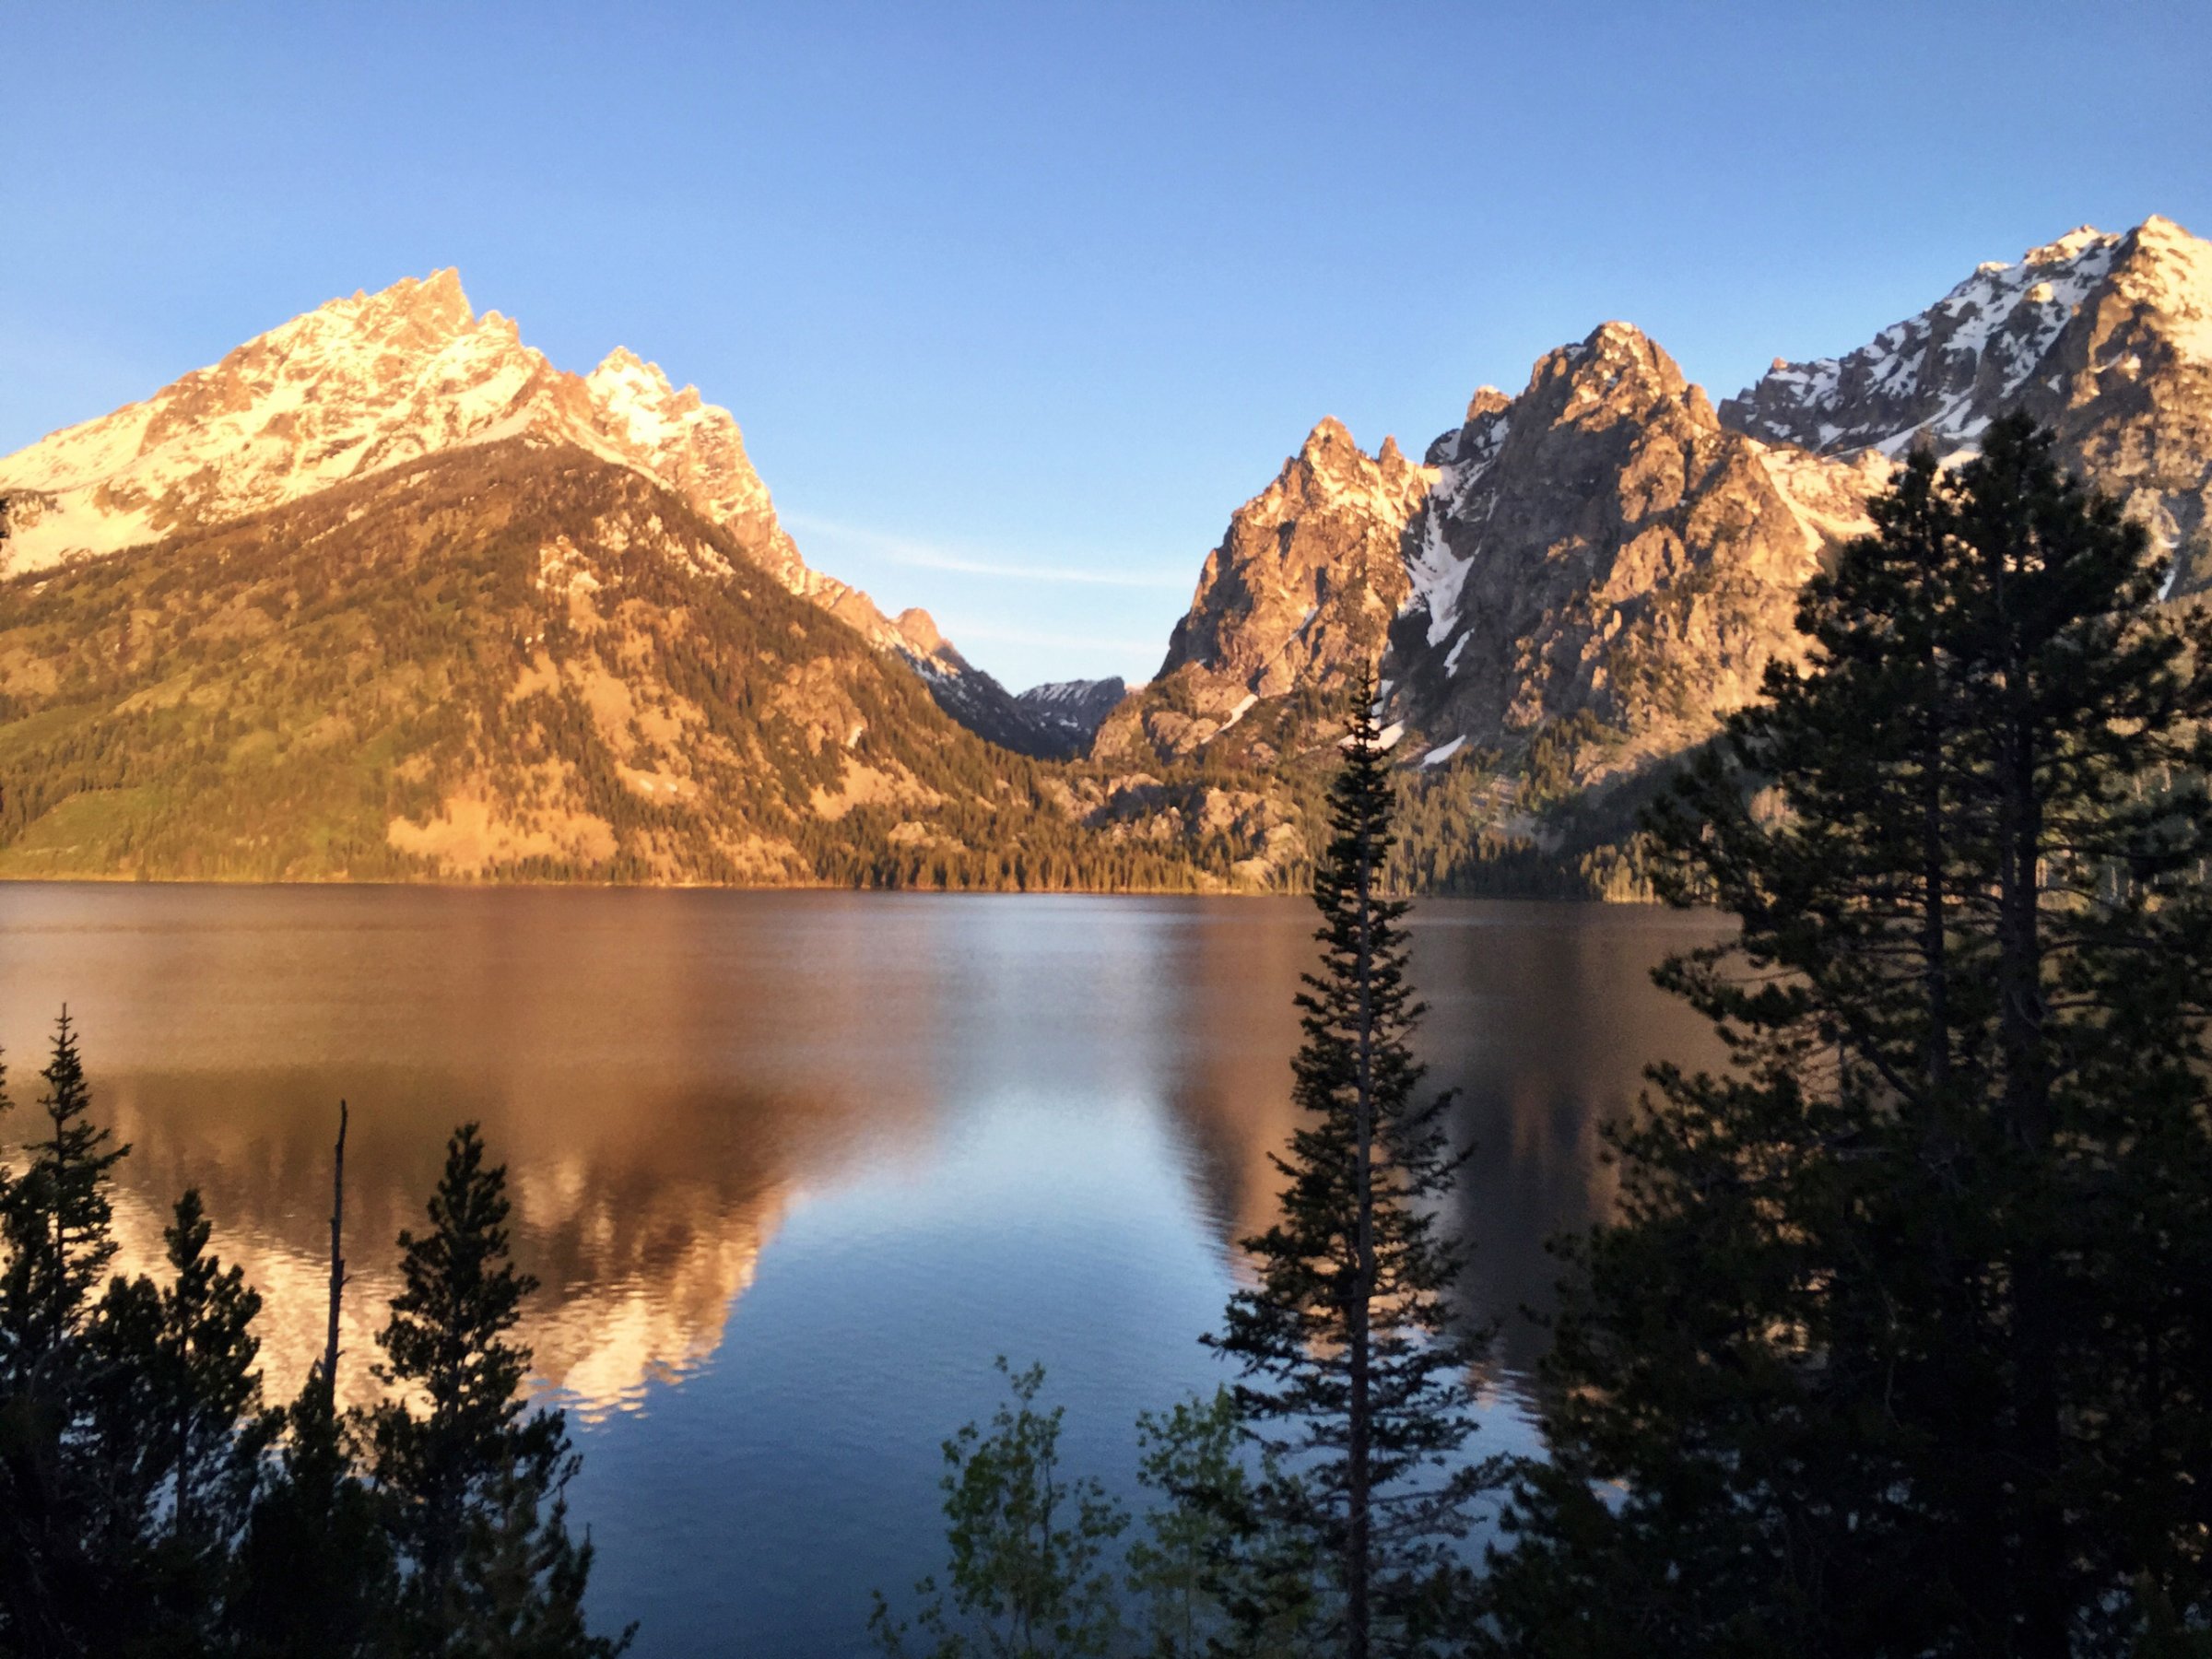 Alpenglow shining on the Grand Tetons is reflected in Jenny Lake June 4, 2015, in Grand Teton National Park, Wyoming. The park offers amazing scenery and hiking opportunities without the crowds of nearby Yellowstone National Park. (Erin Madison/Great Falls Tribune via AP) MANDATORY CREDIT